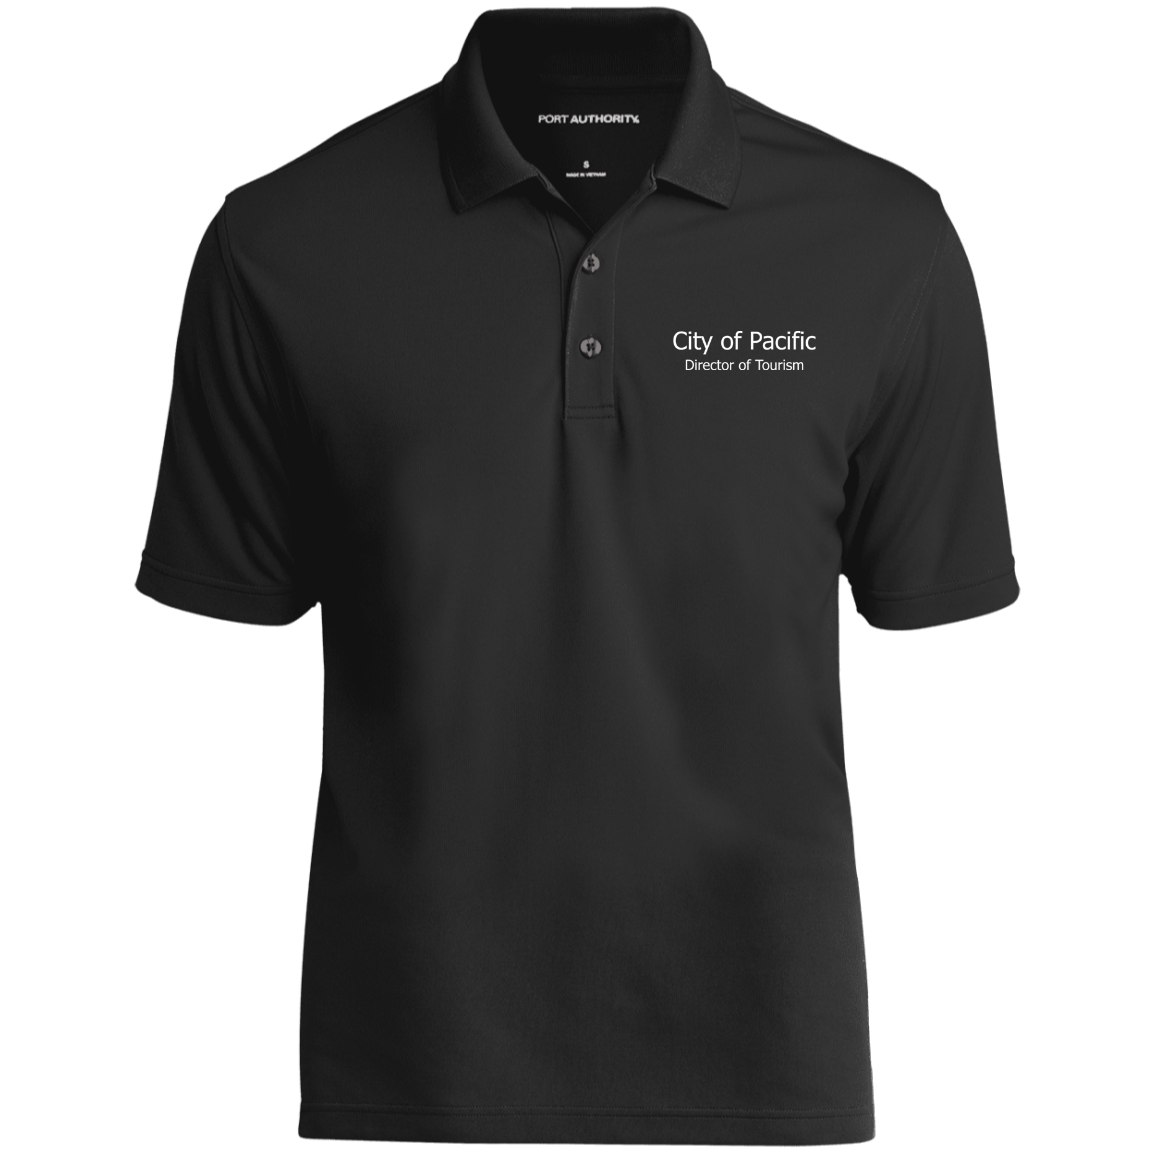 K110 Embroidered Dry Zone UV Micro-Mesh Polo